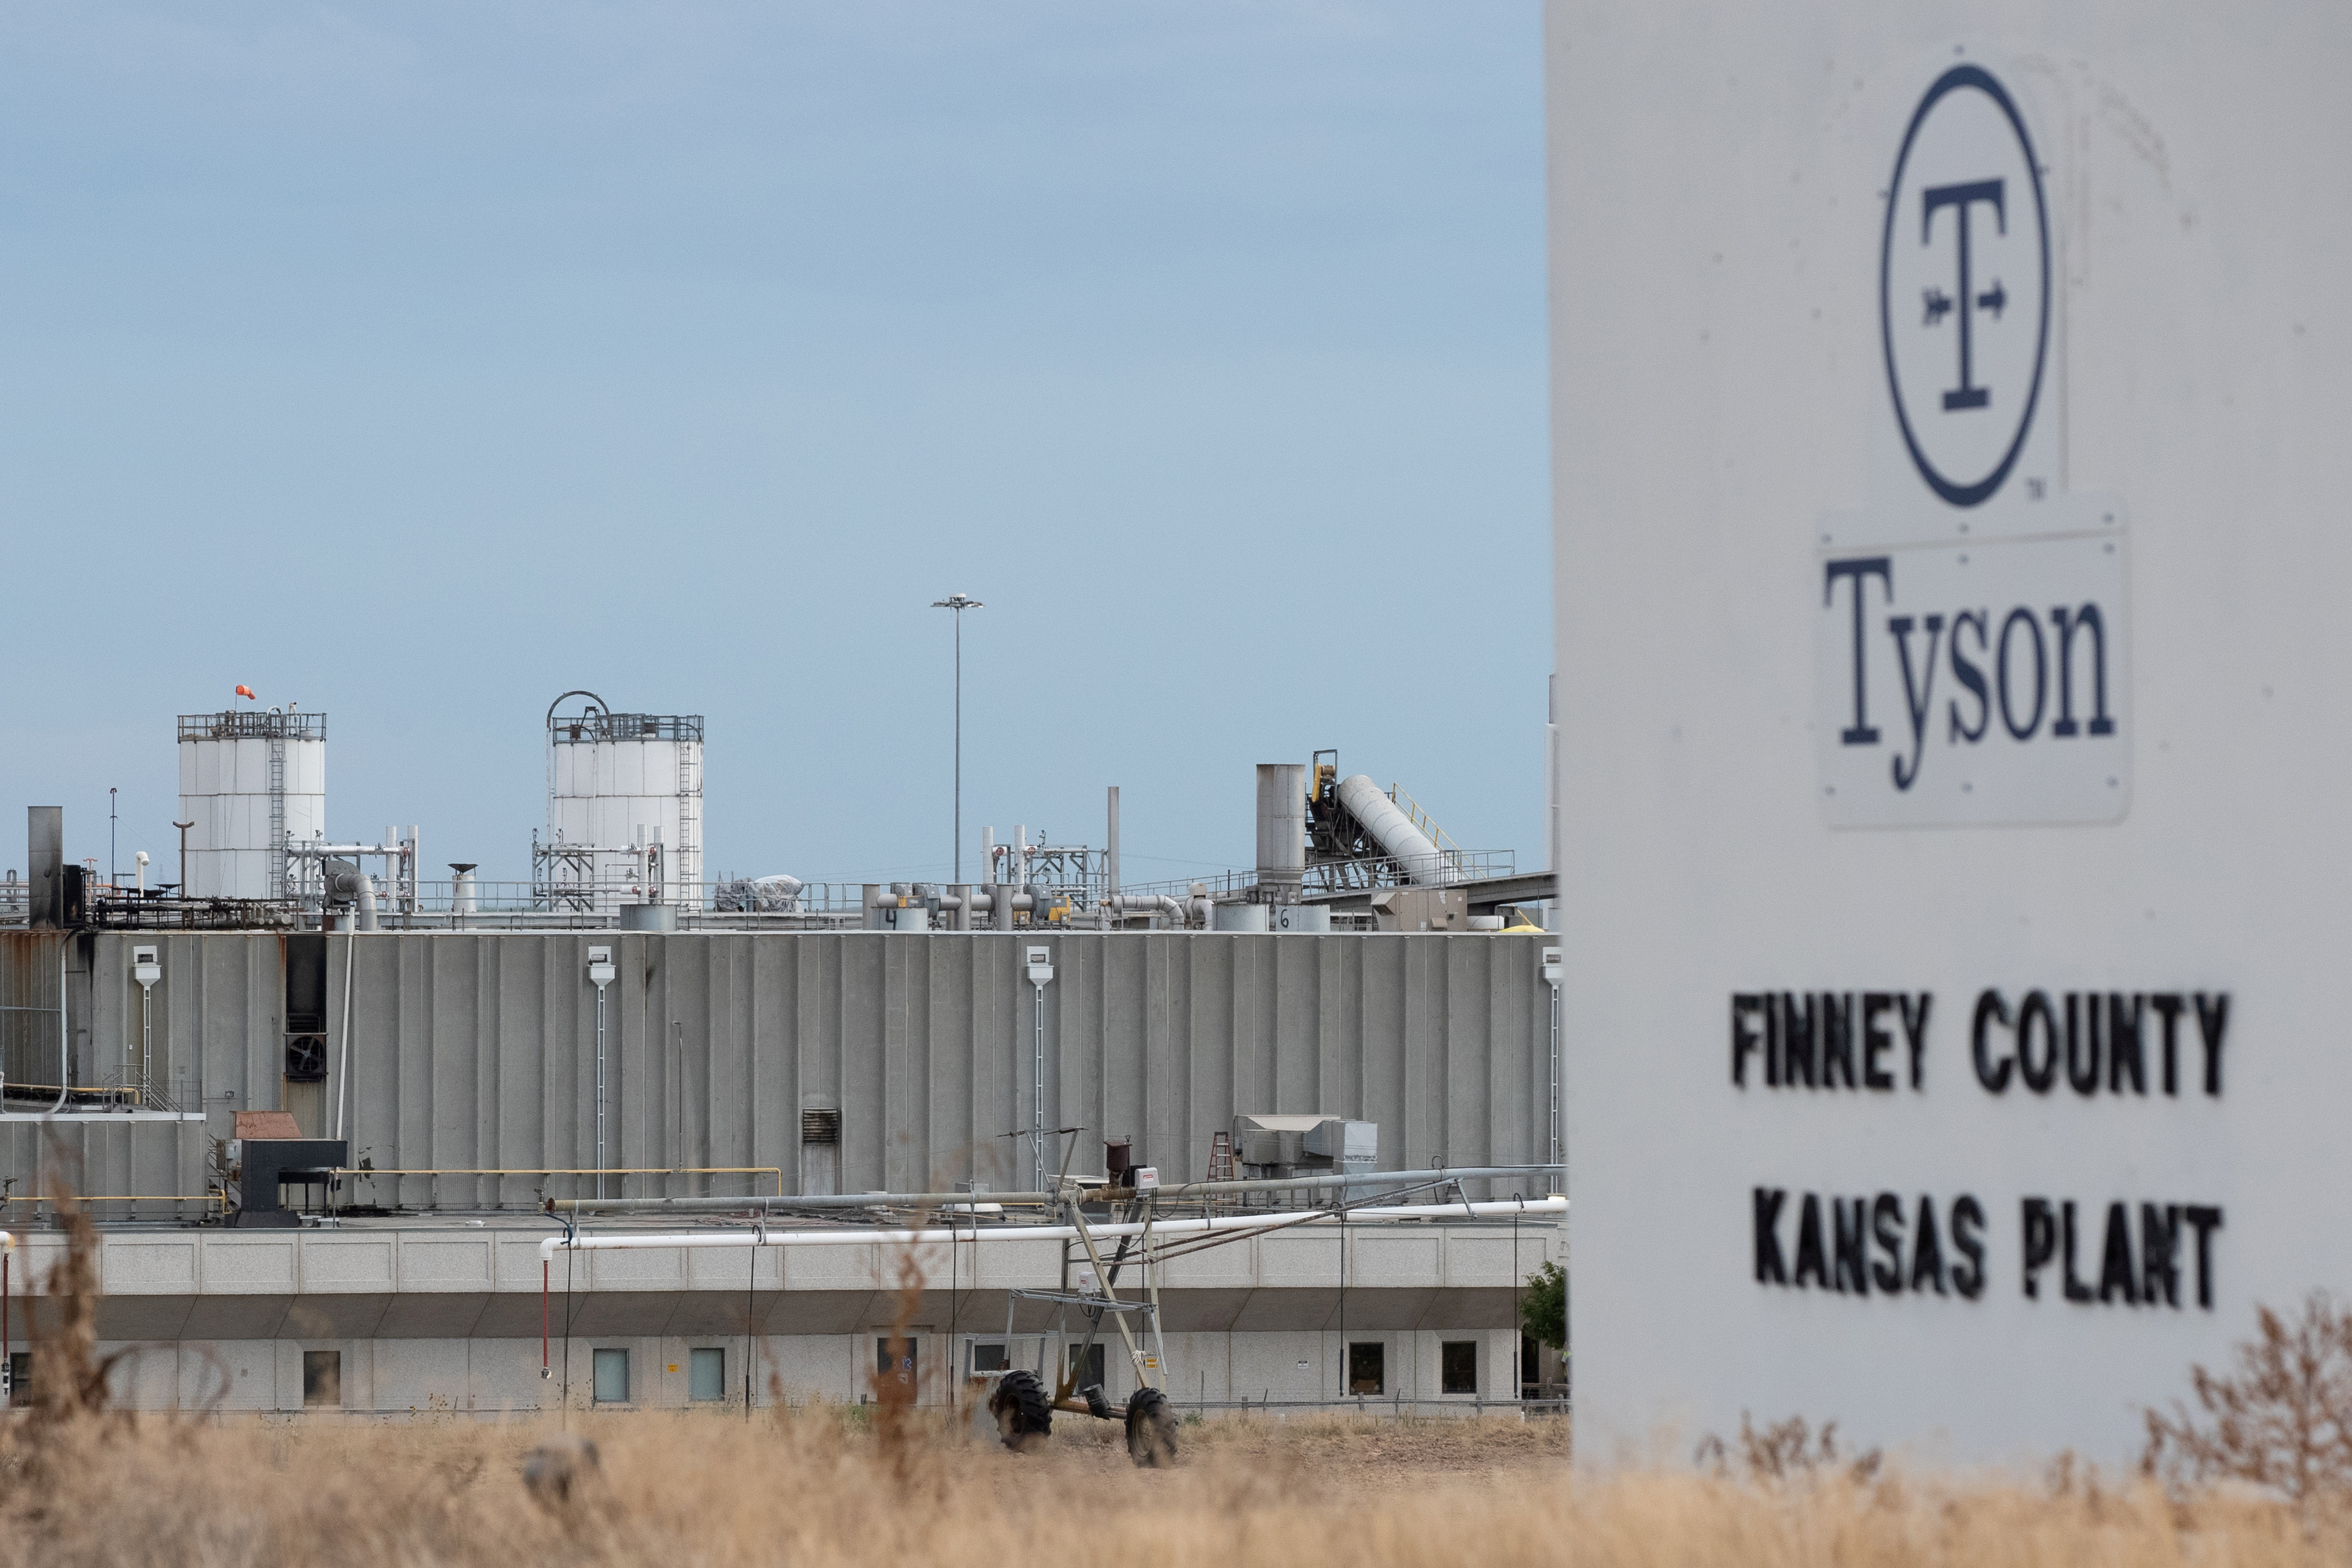 Tyson Fresh Meats processing plant is seen three days after a fire heavily damaged the facility in the Finney County town of Holcomb